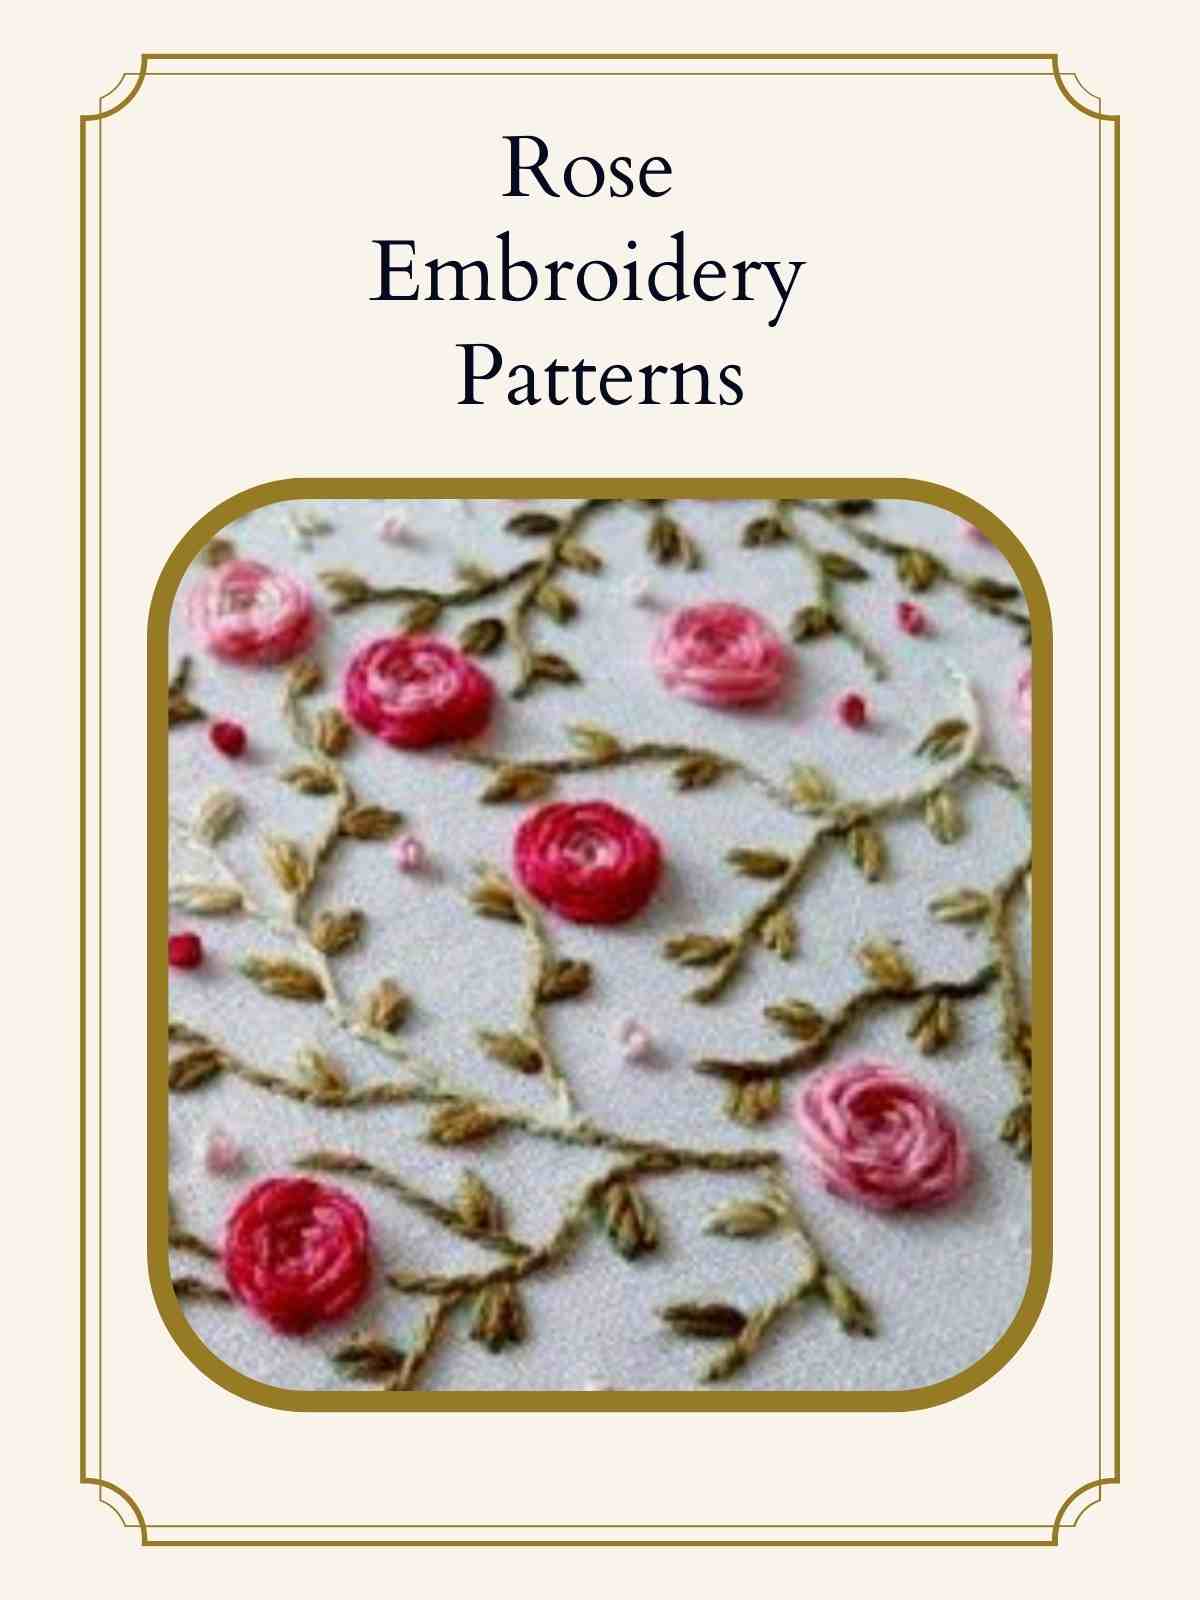 Embroidery Patterns with textured roses